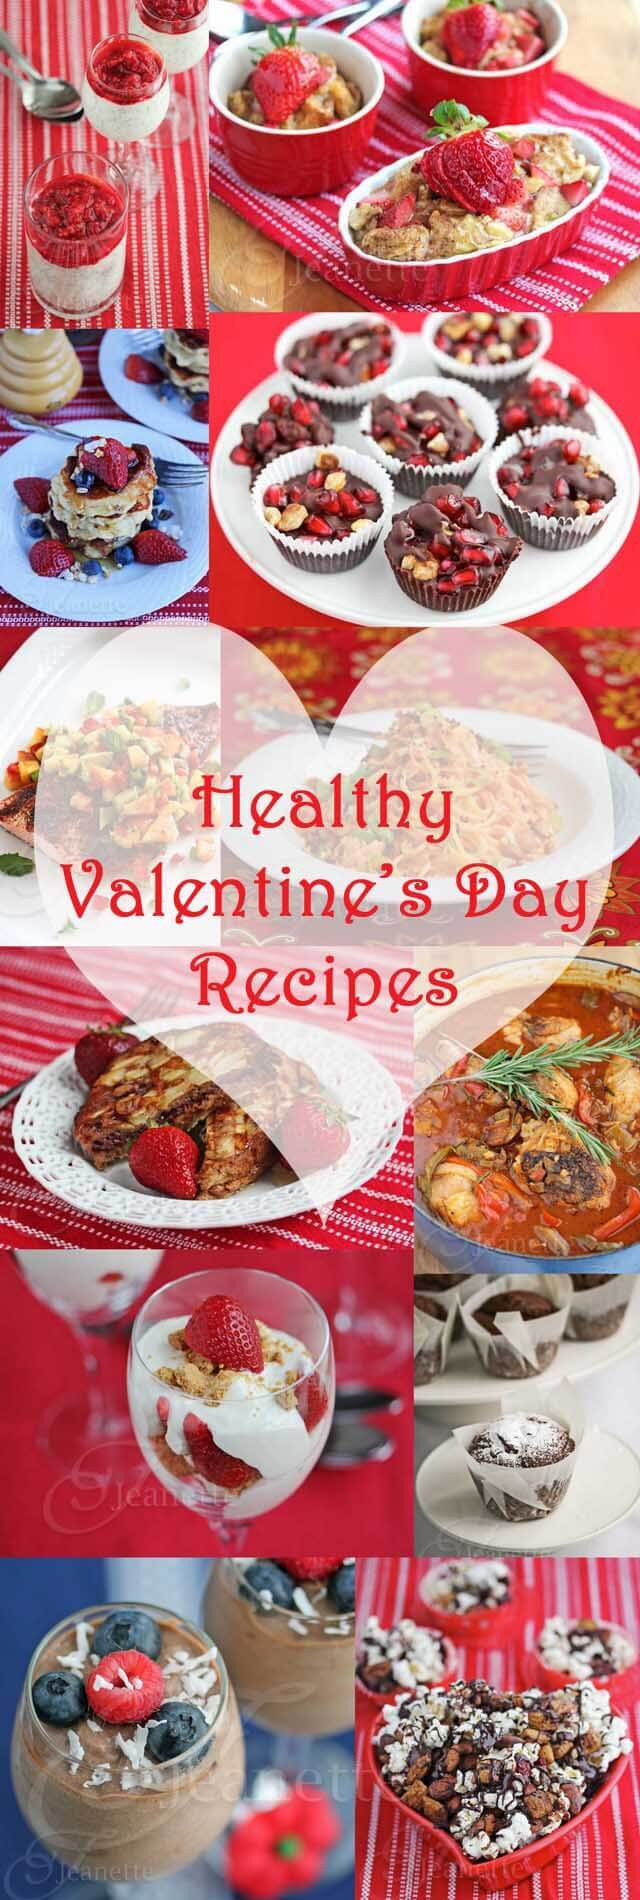 Valentines Day Recipe
 Healthy Valentines Day Recipes Jeanette s Healthy Living